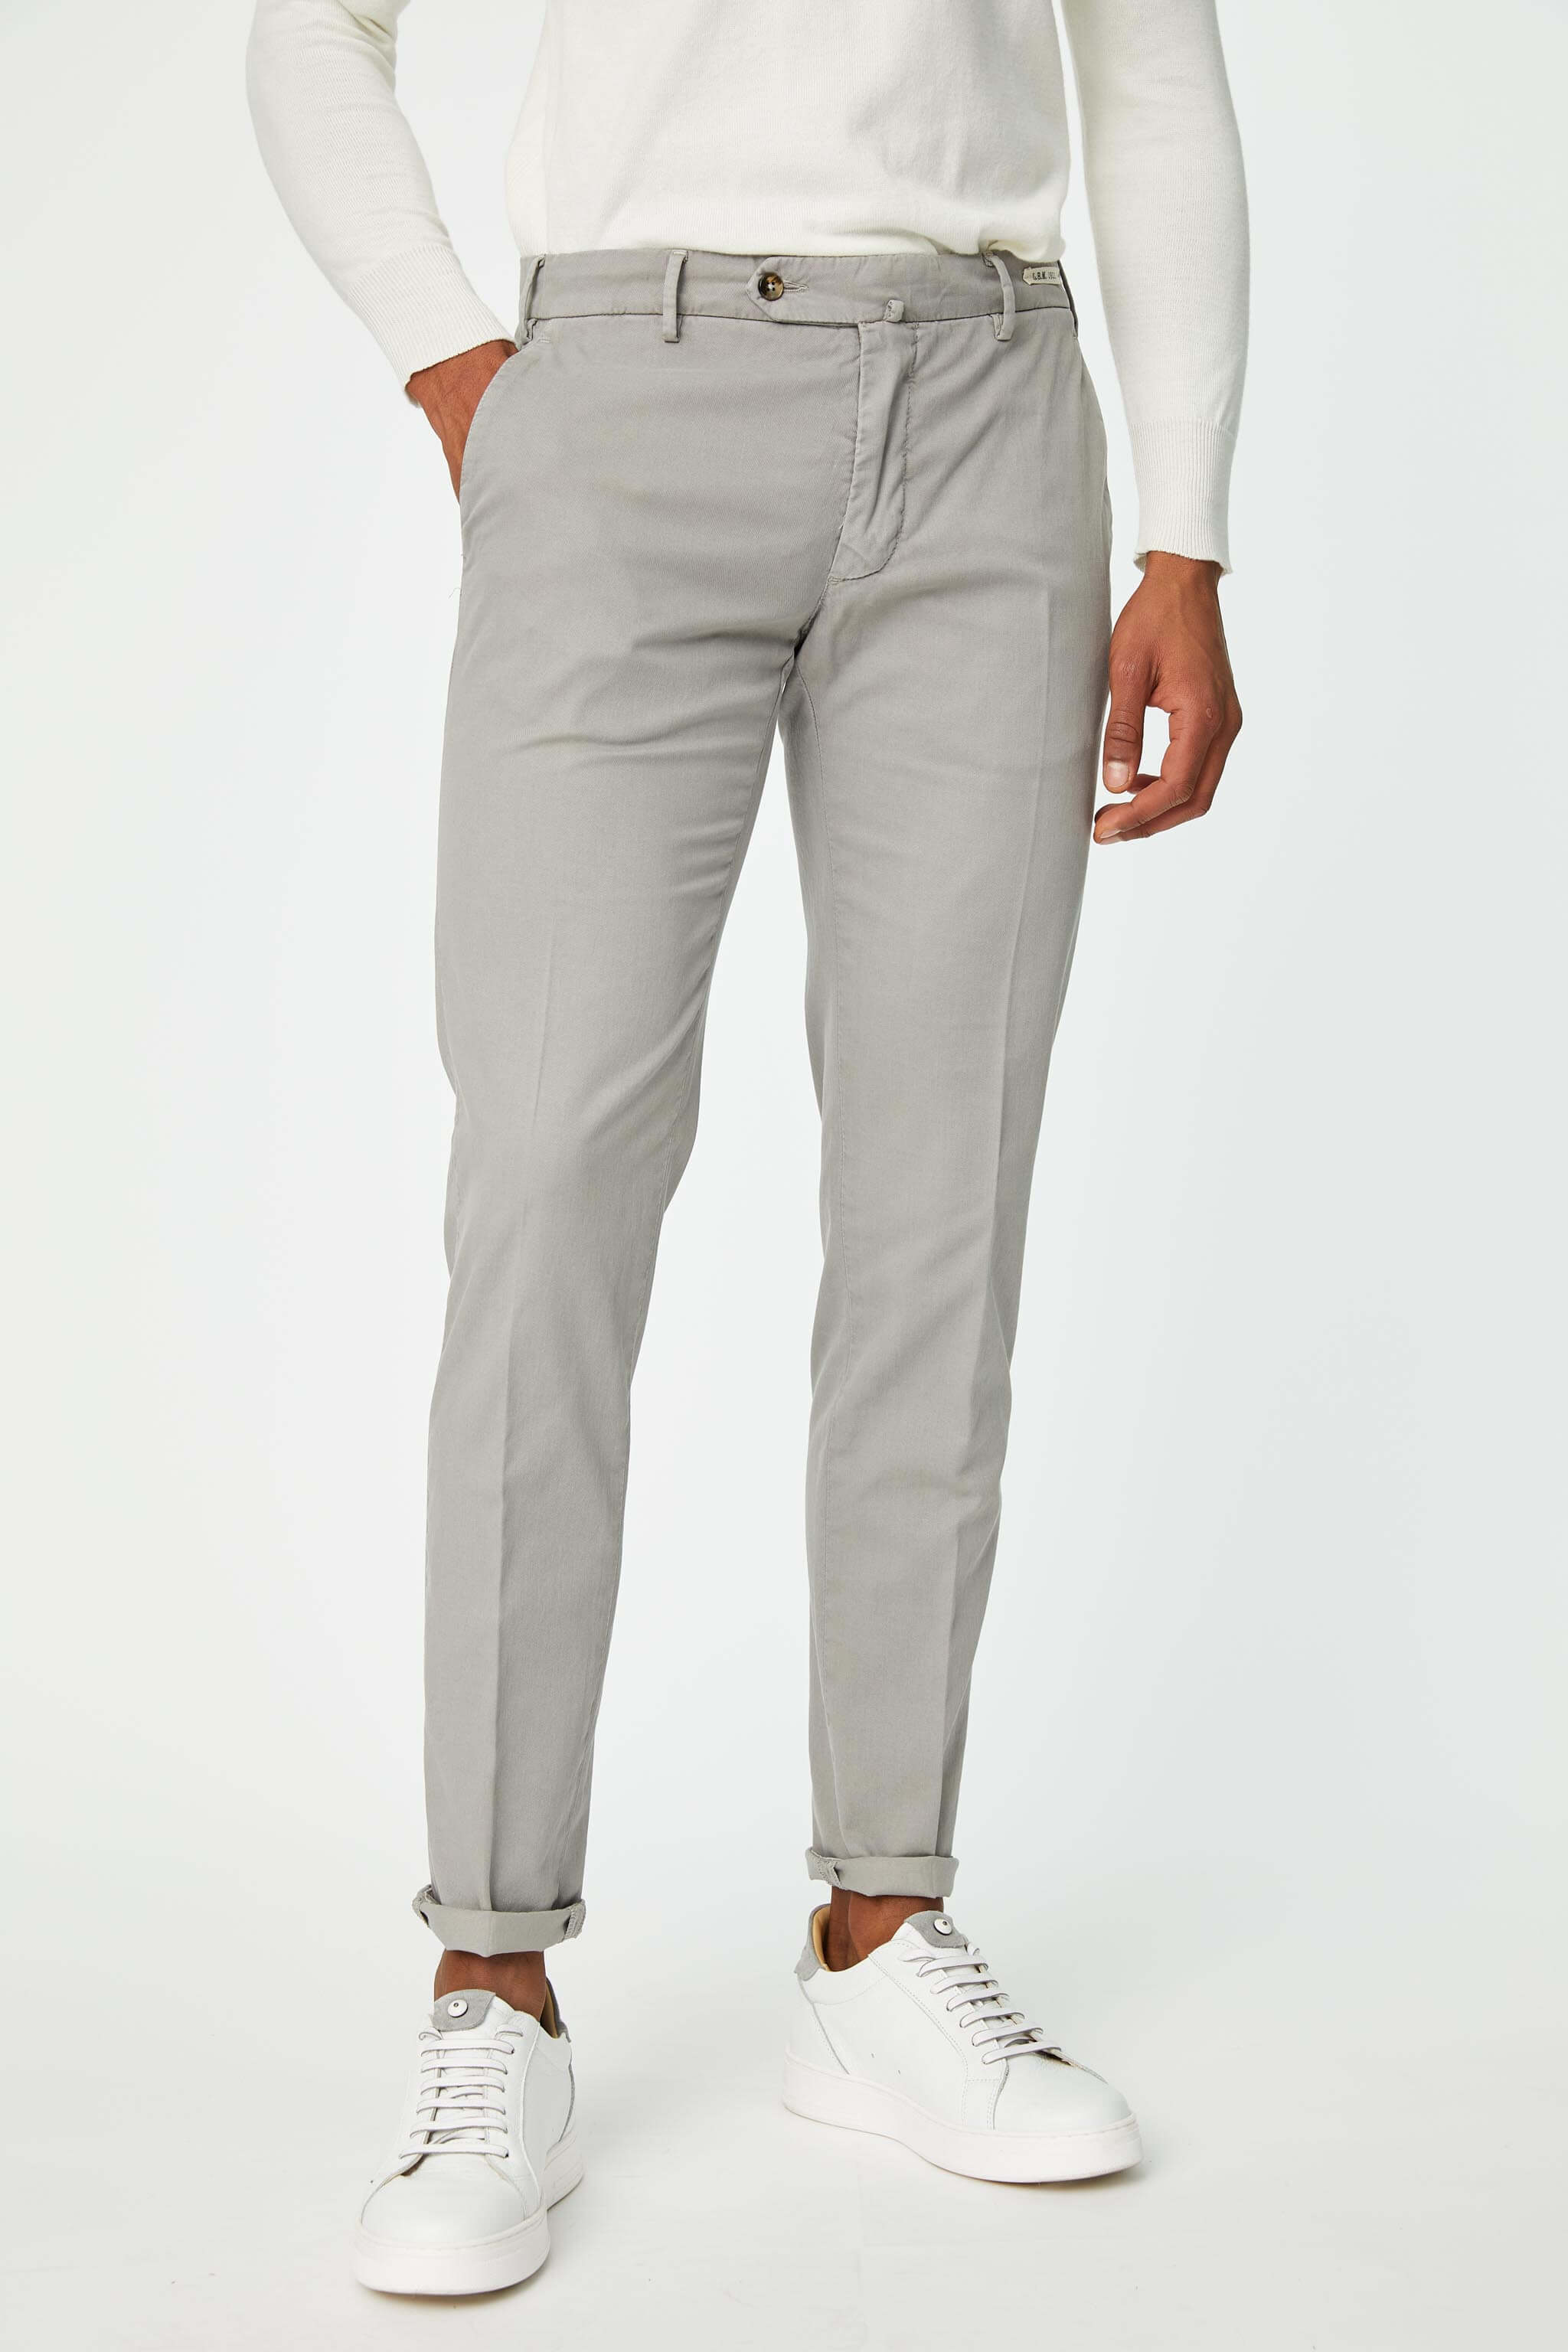 Garment-dyed RAY pants in gray